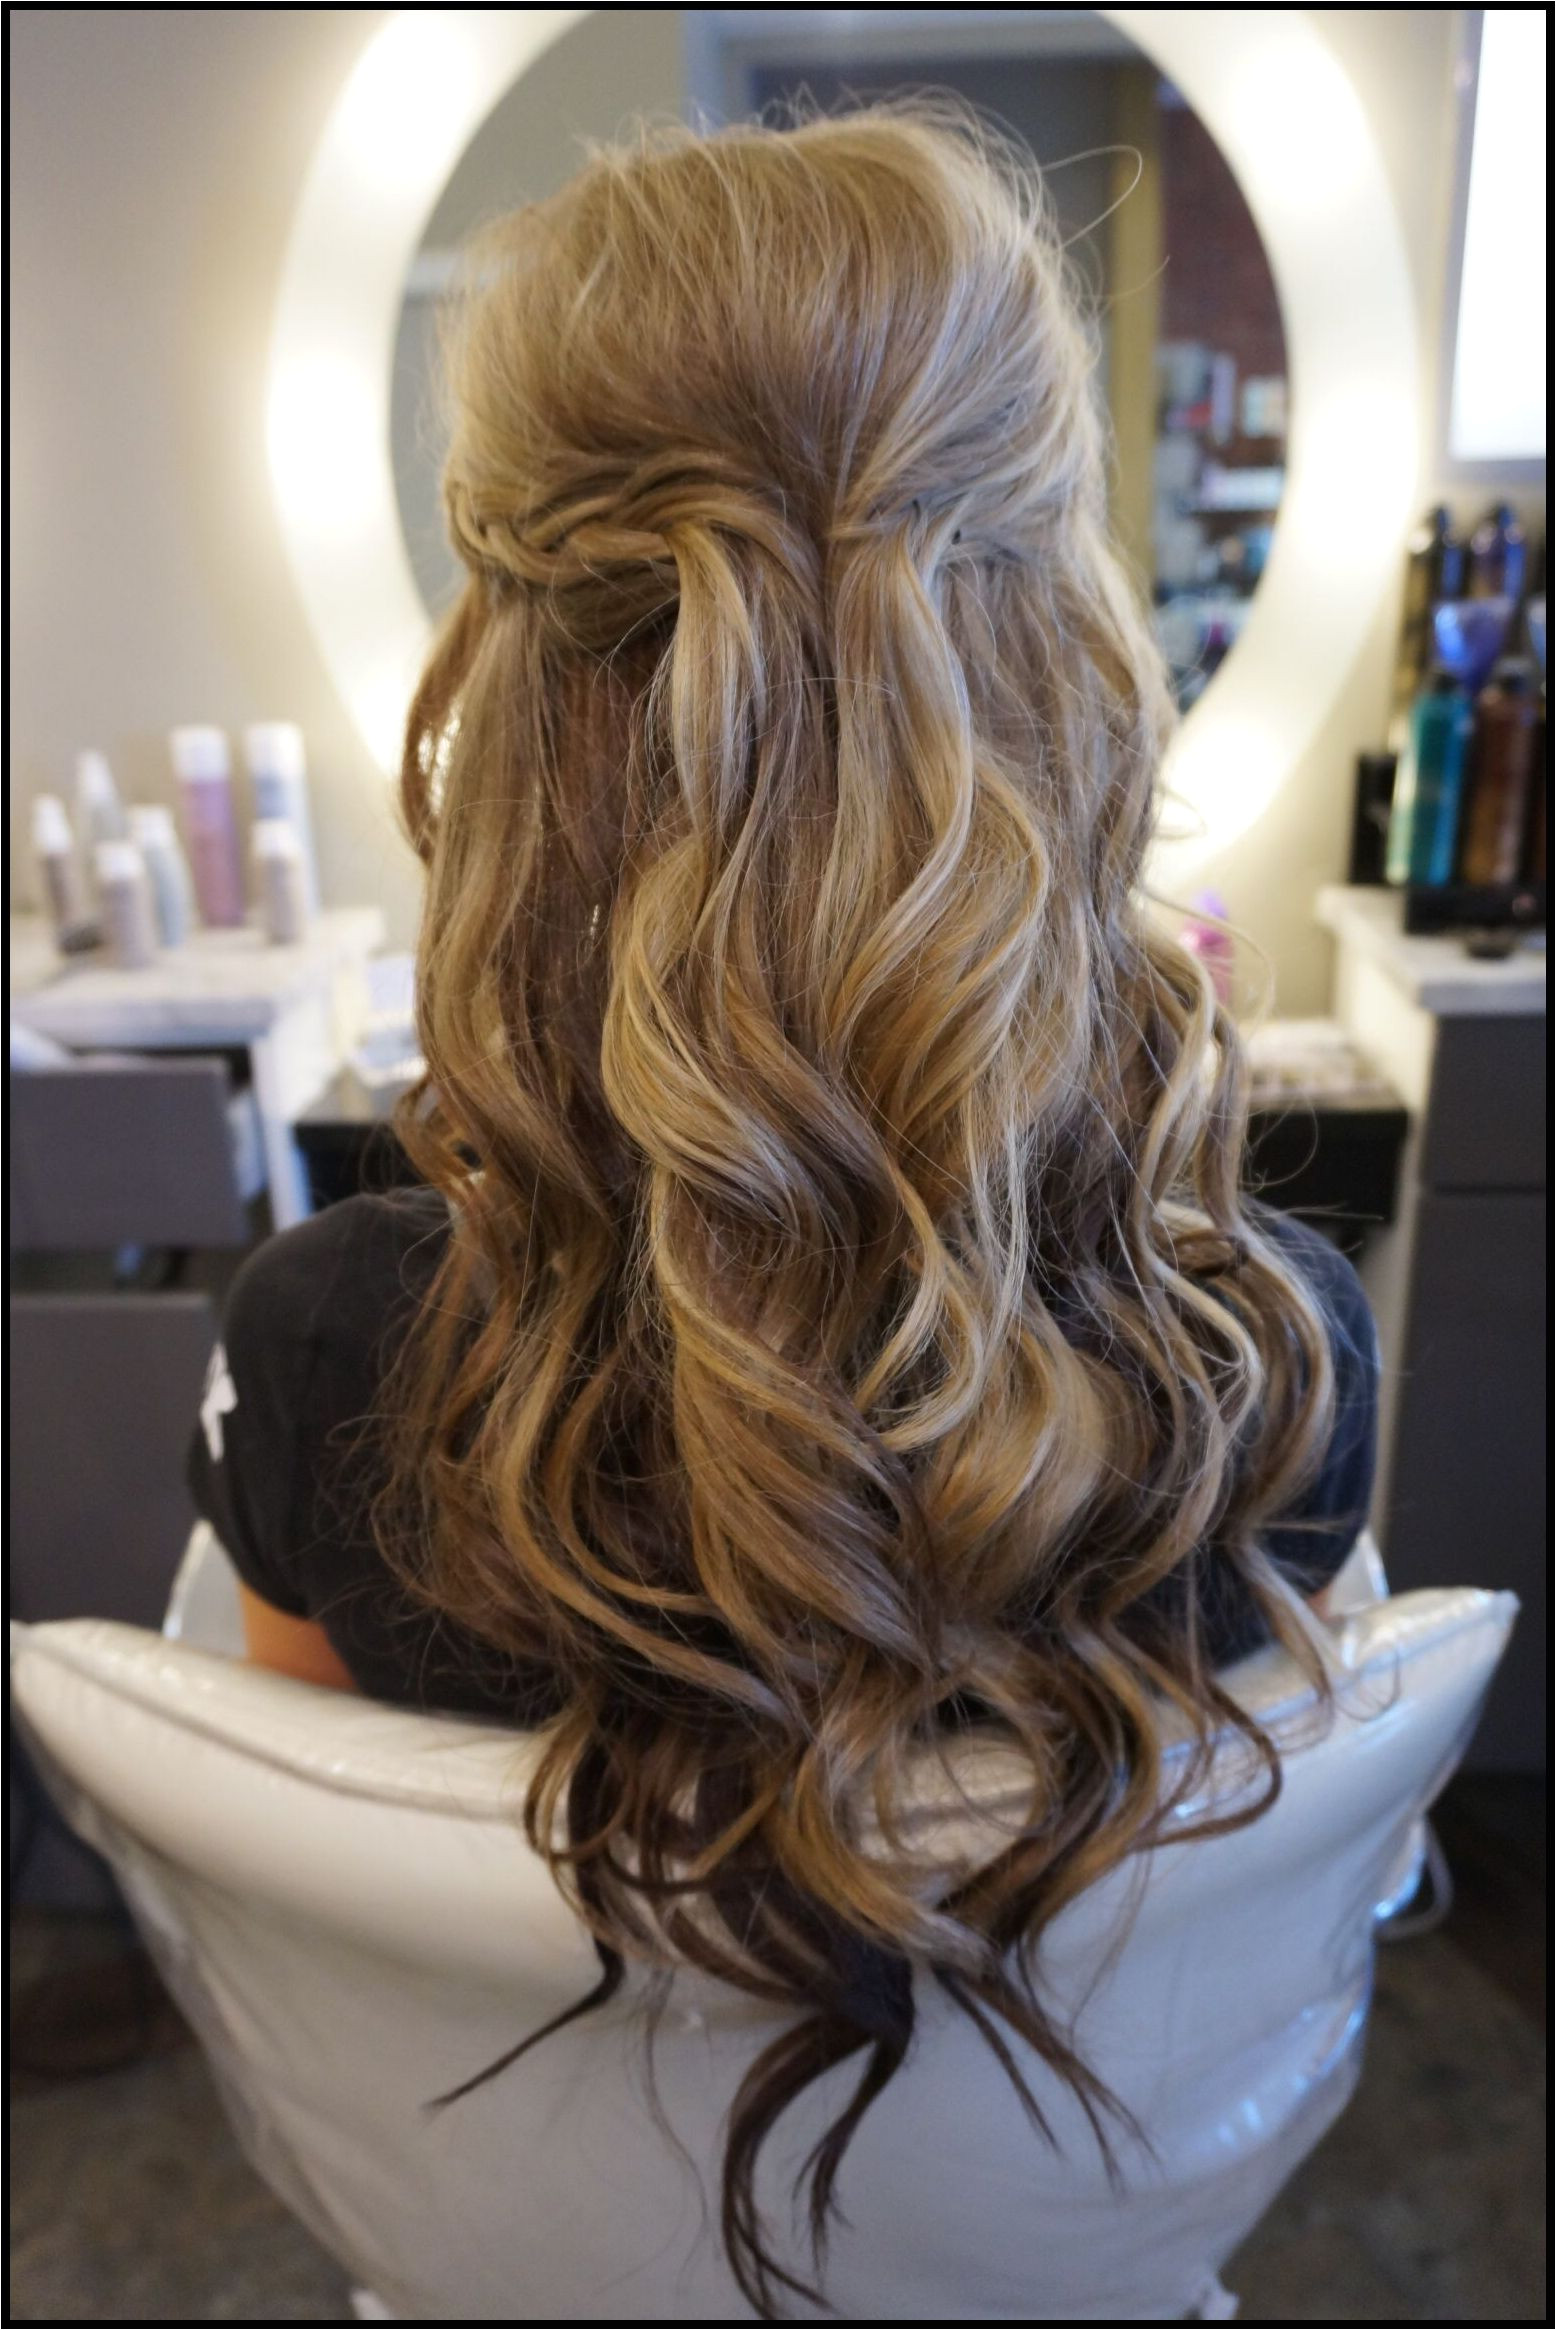 down and haircuts wavy Half Up Wavy Pretty for the long haired girls Luxus Home ing Frisuren für langes Haar